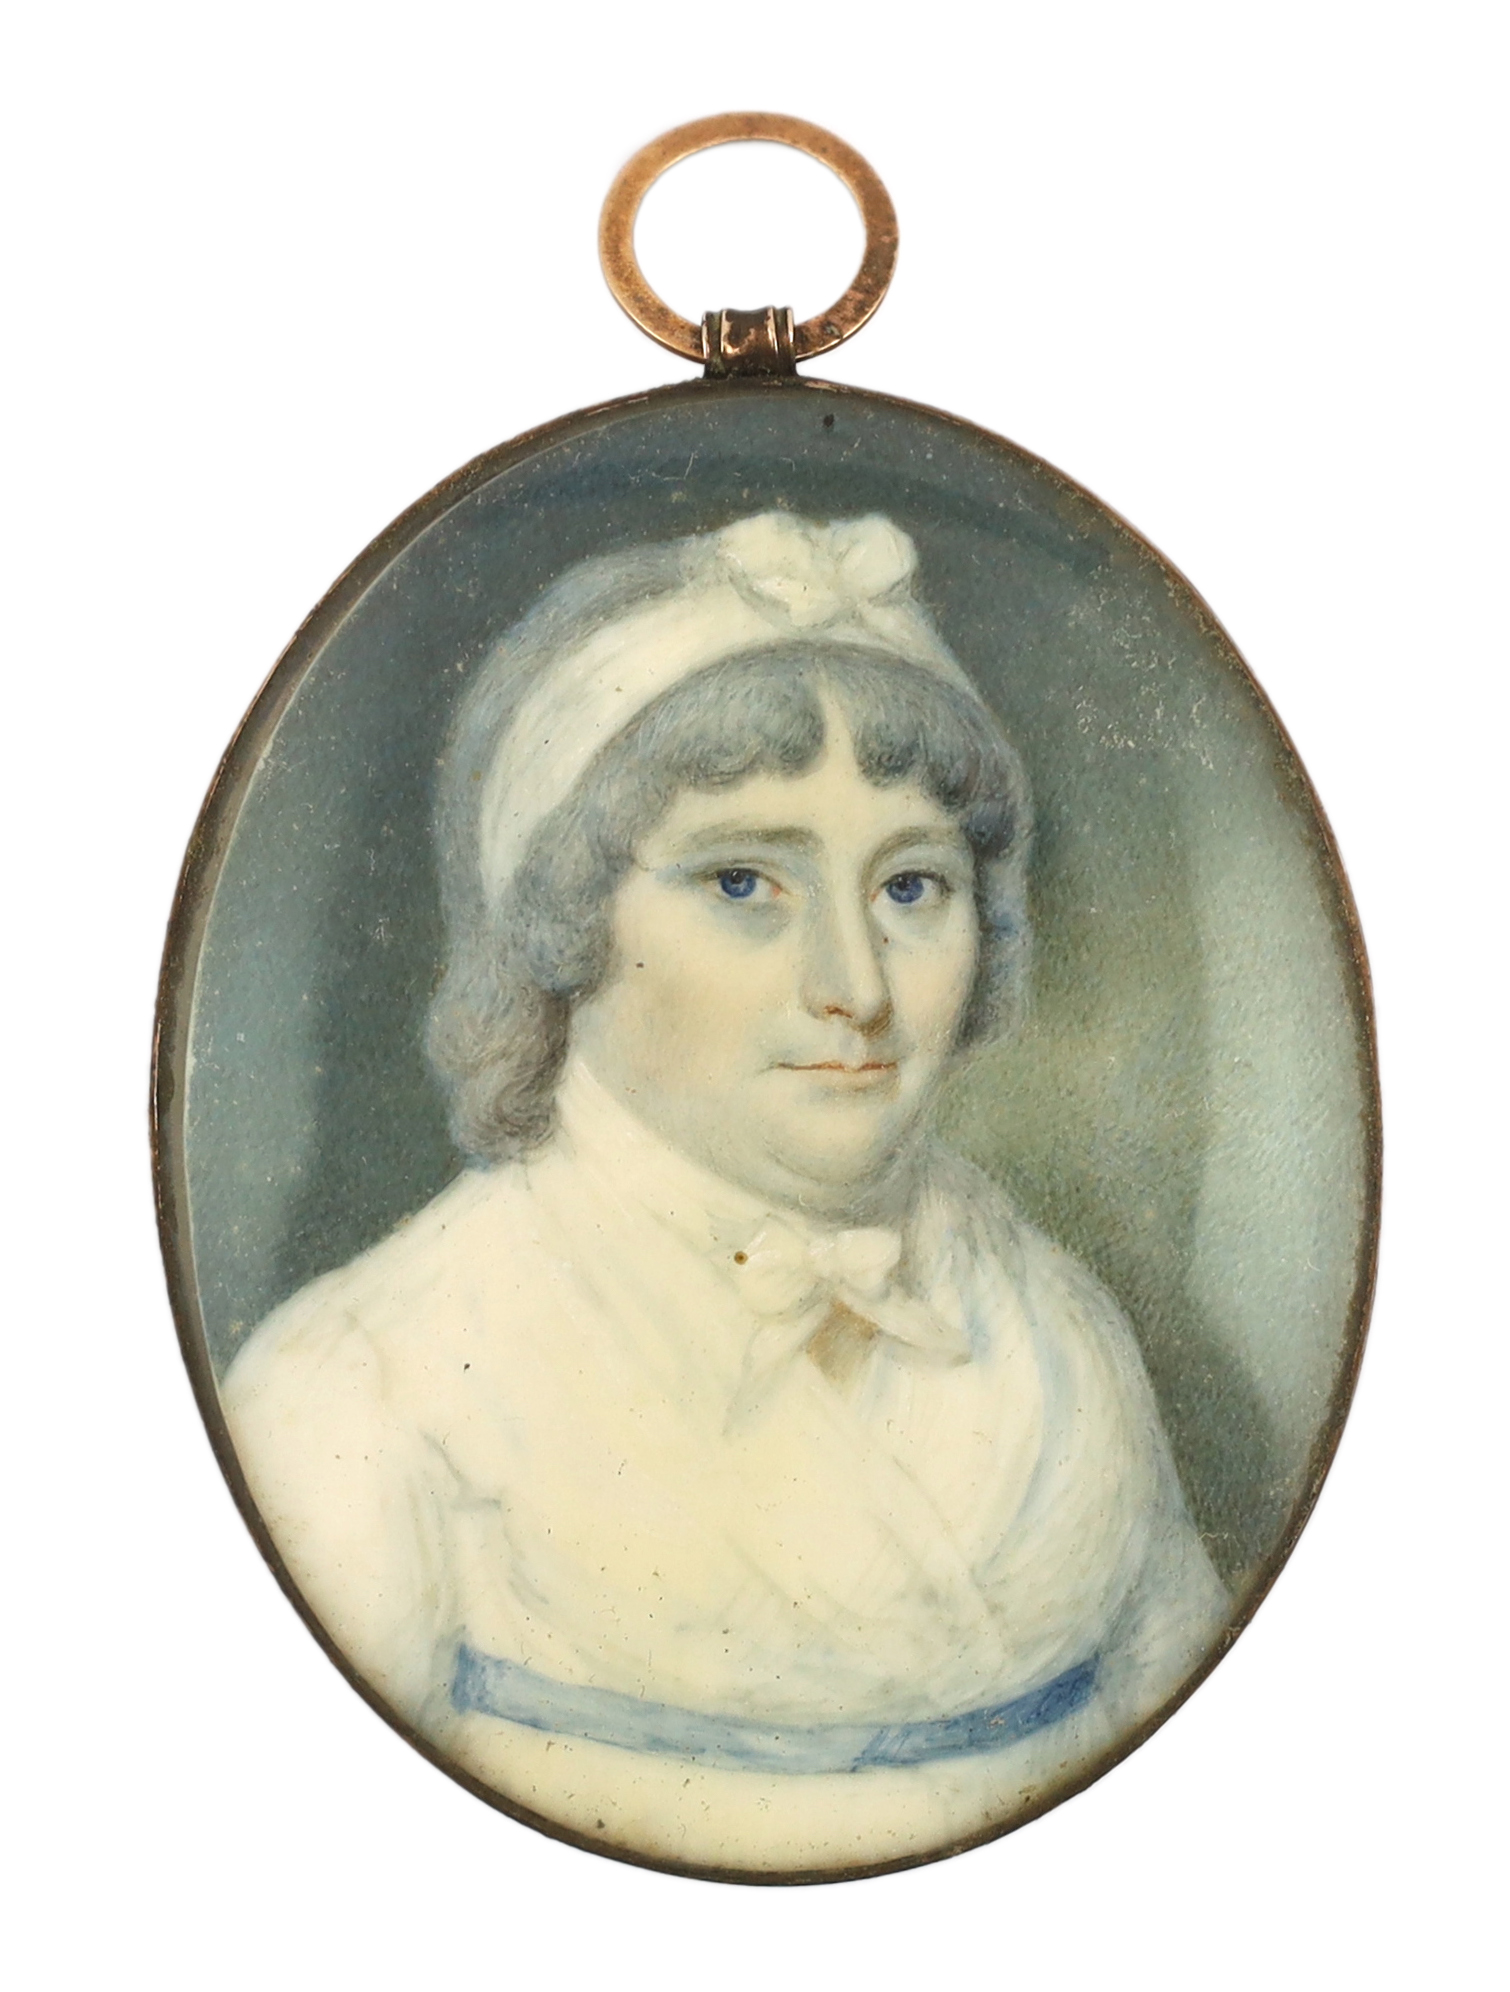 English School circa 1800, Portrait miniature of a lady, watercolour on ivory, 6.5 x 5.4cm. CITES Submission reference XDR2EDFW